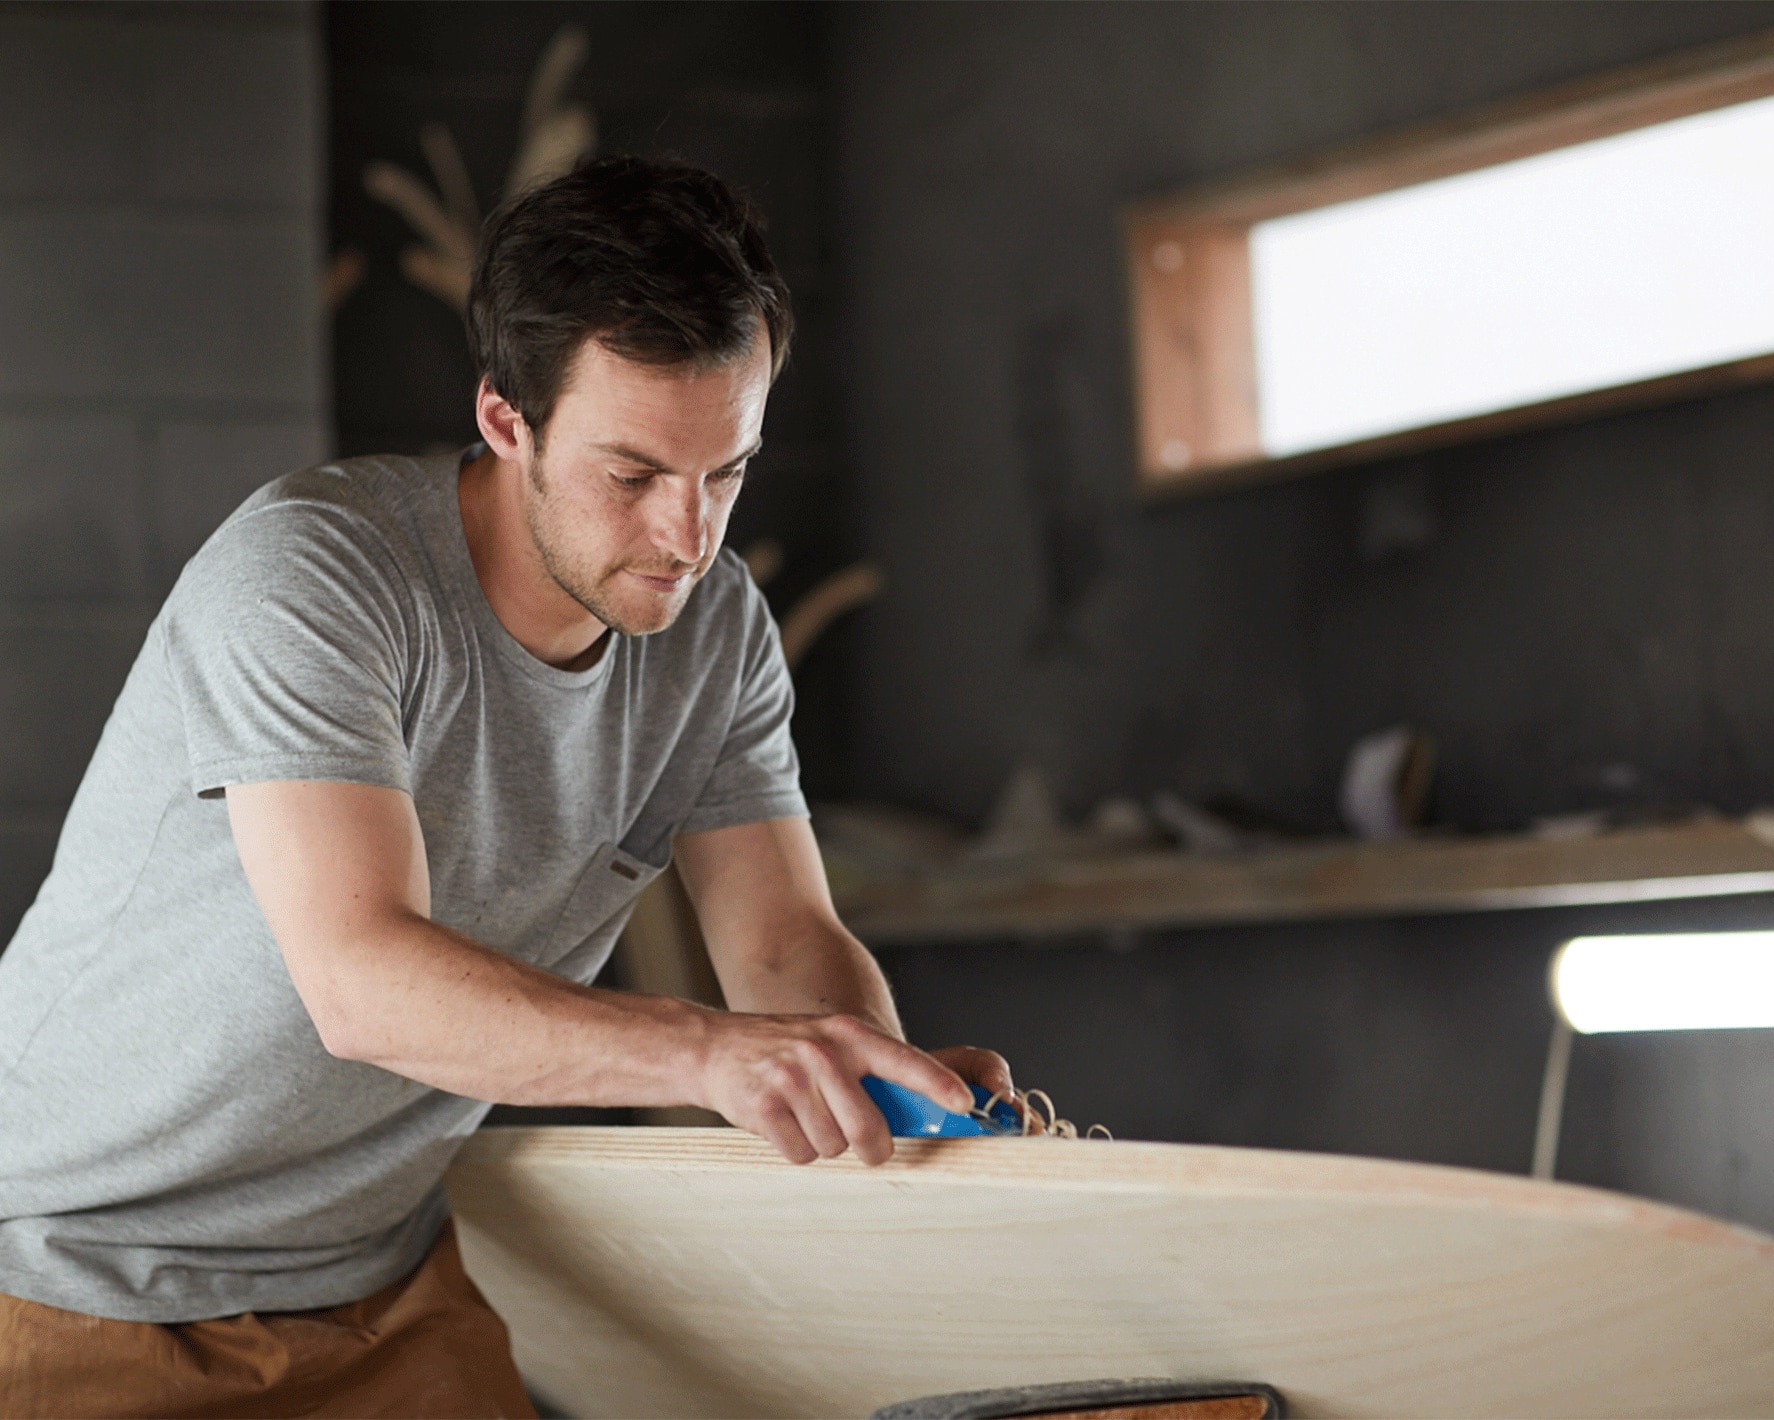 A person shaping and carving a wooden surfboard.